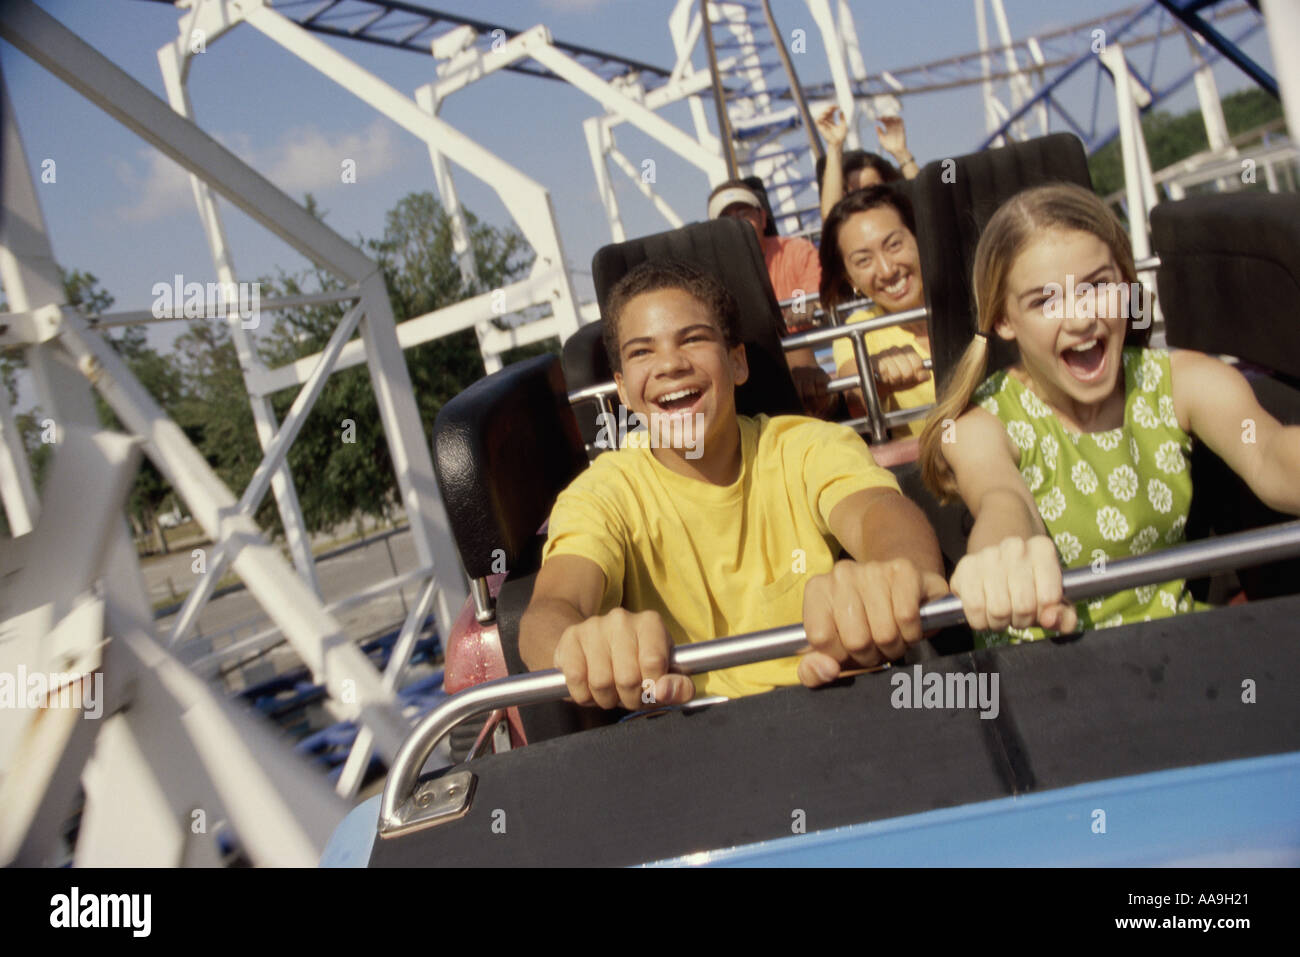 Teenage Couple On A Roller Coaster Ride Stock Photo 4099